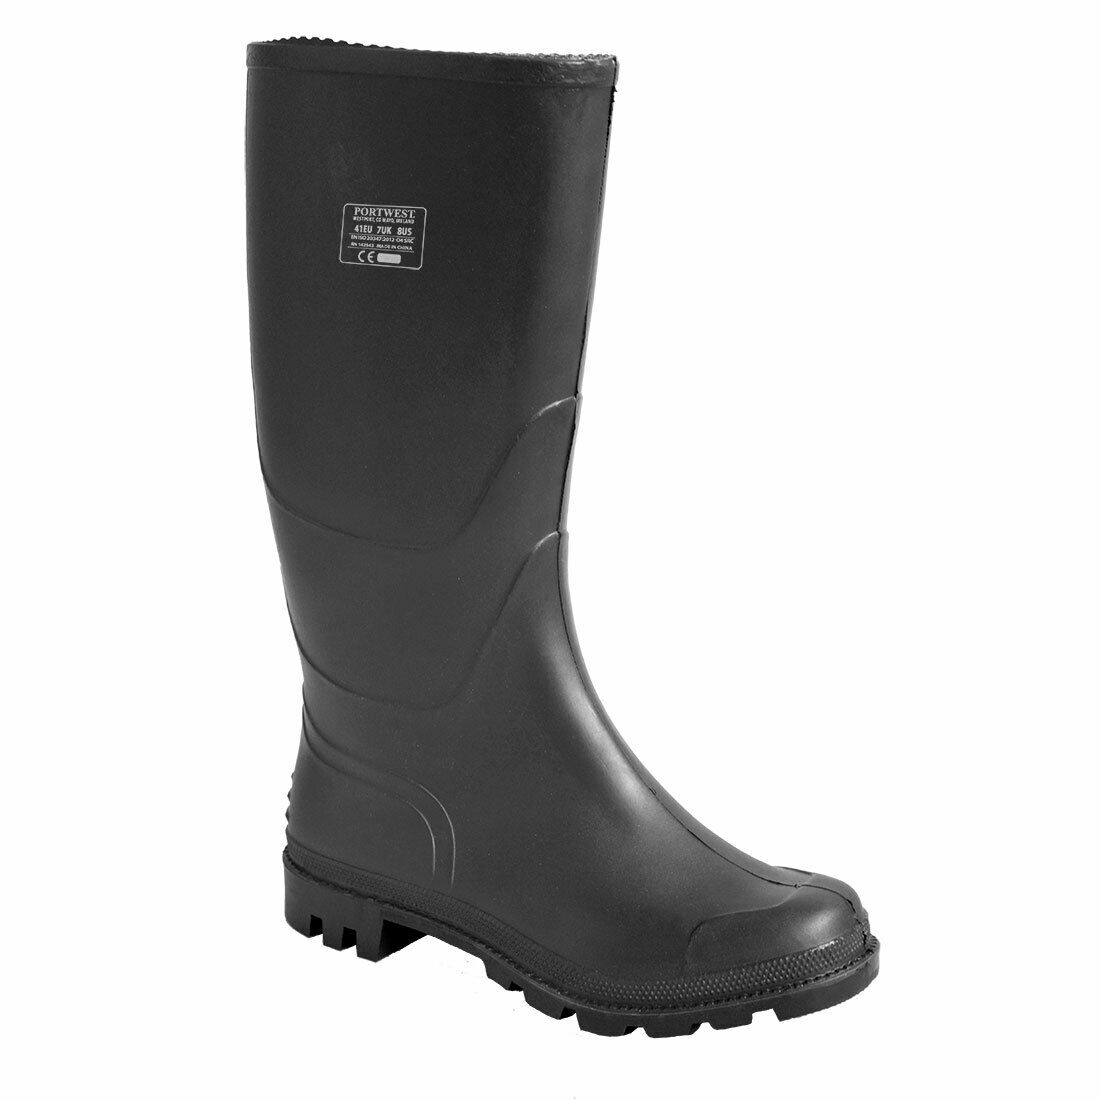 Portwest Mens PVC Wellington 04 Farming Rubber Boots Waterproof Work Safety FW90-Collins Clothing Co